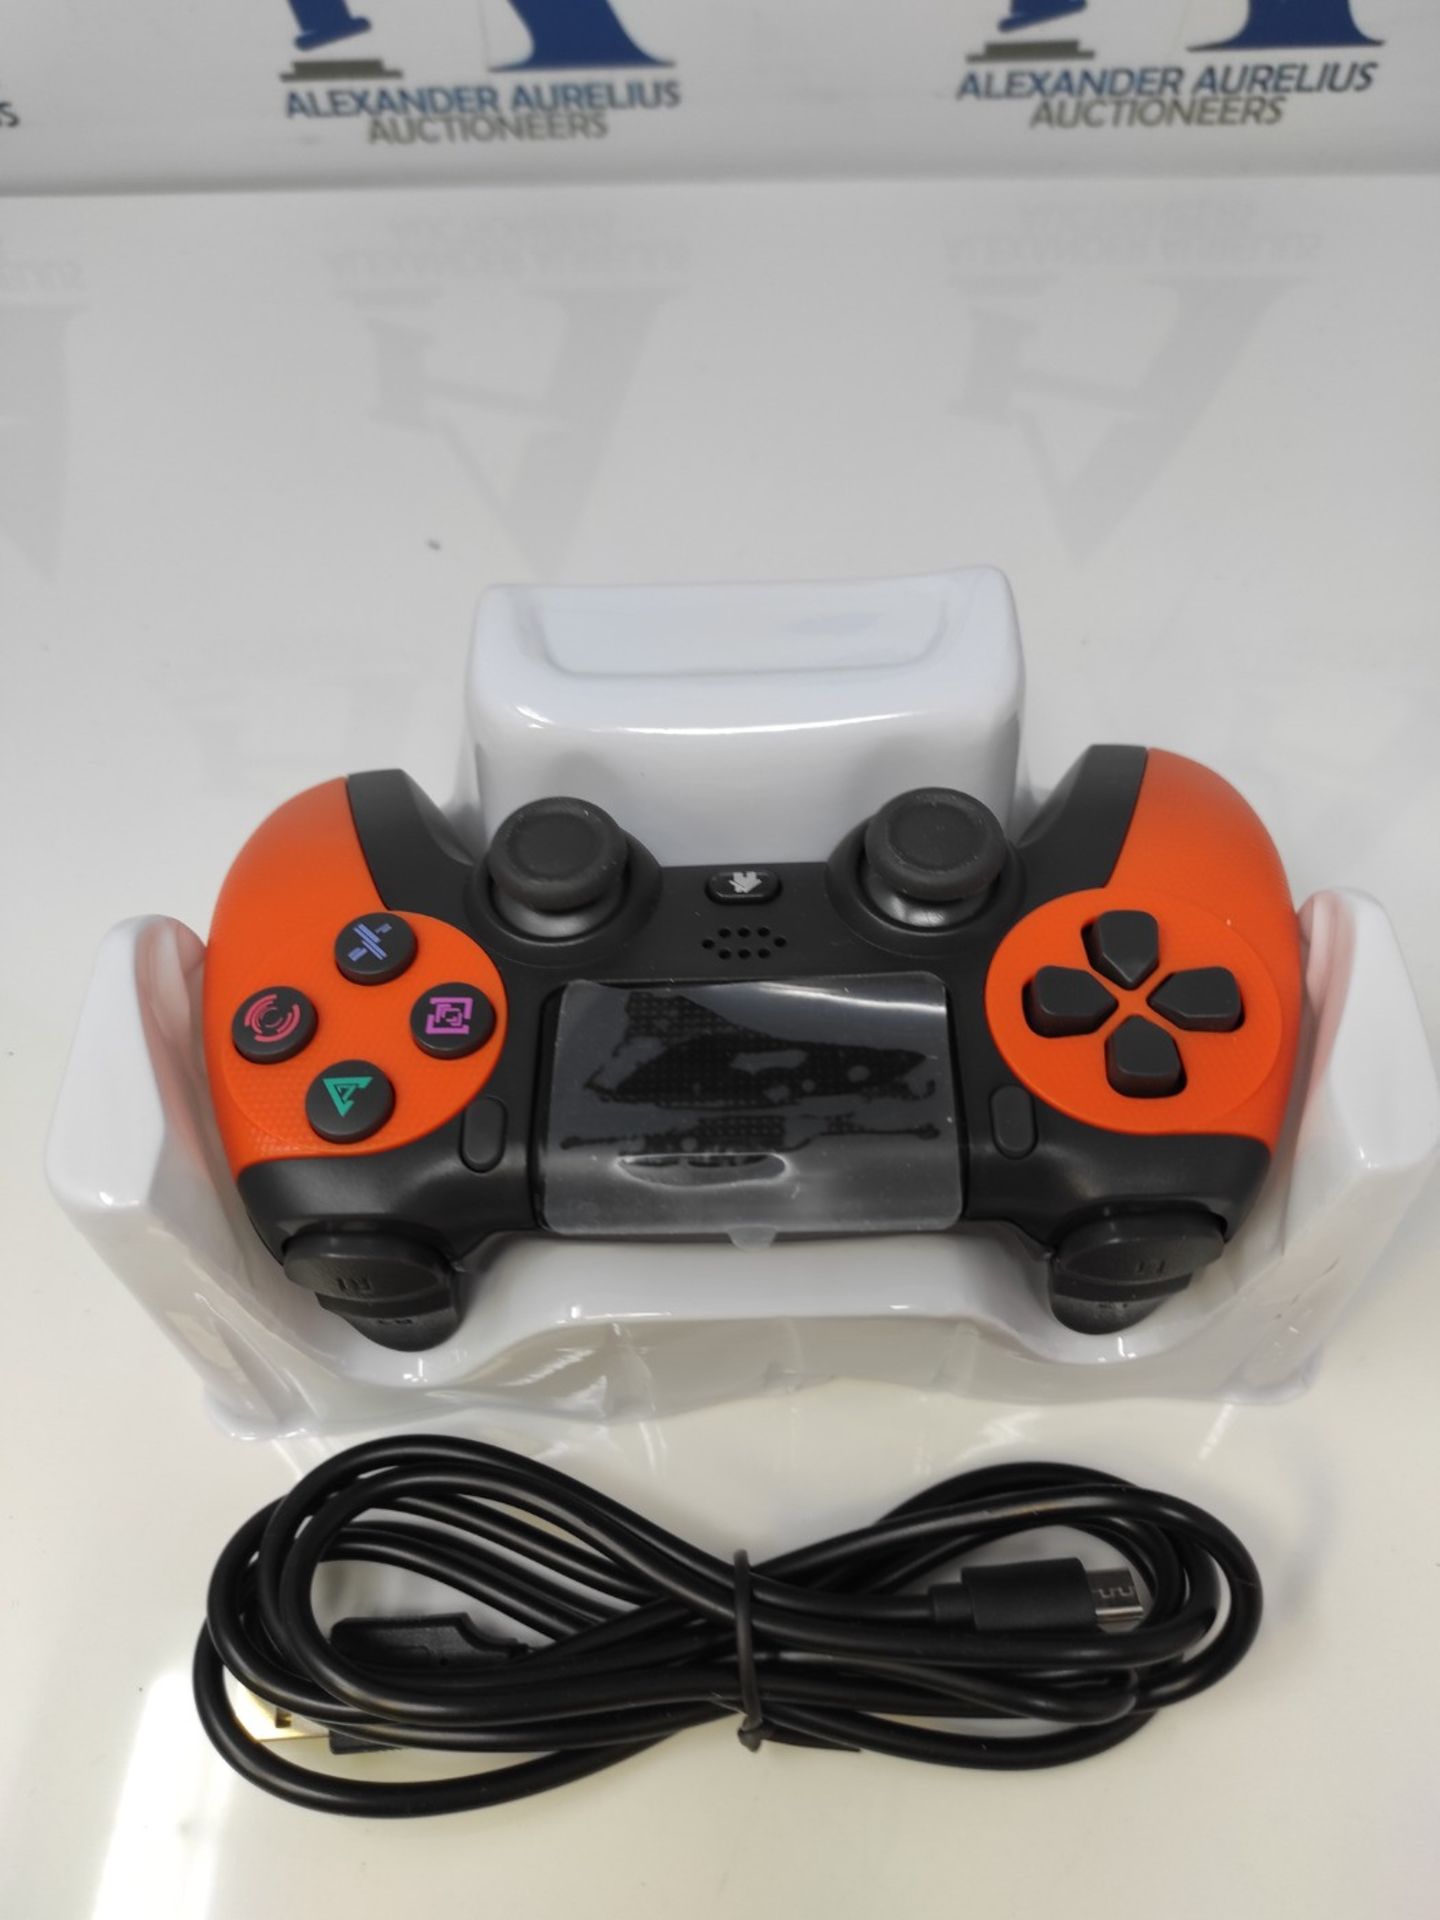 NK Mando for PS4 / PS3 / PC/Mobile Wireless - Wireless Controller with Dualshock, 6 ax - Image 3 of 3